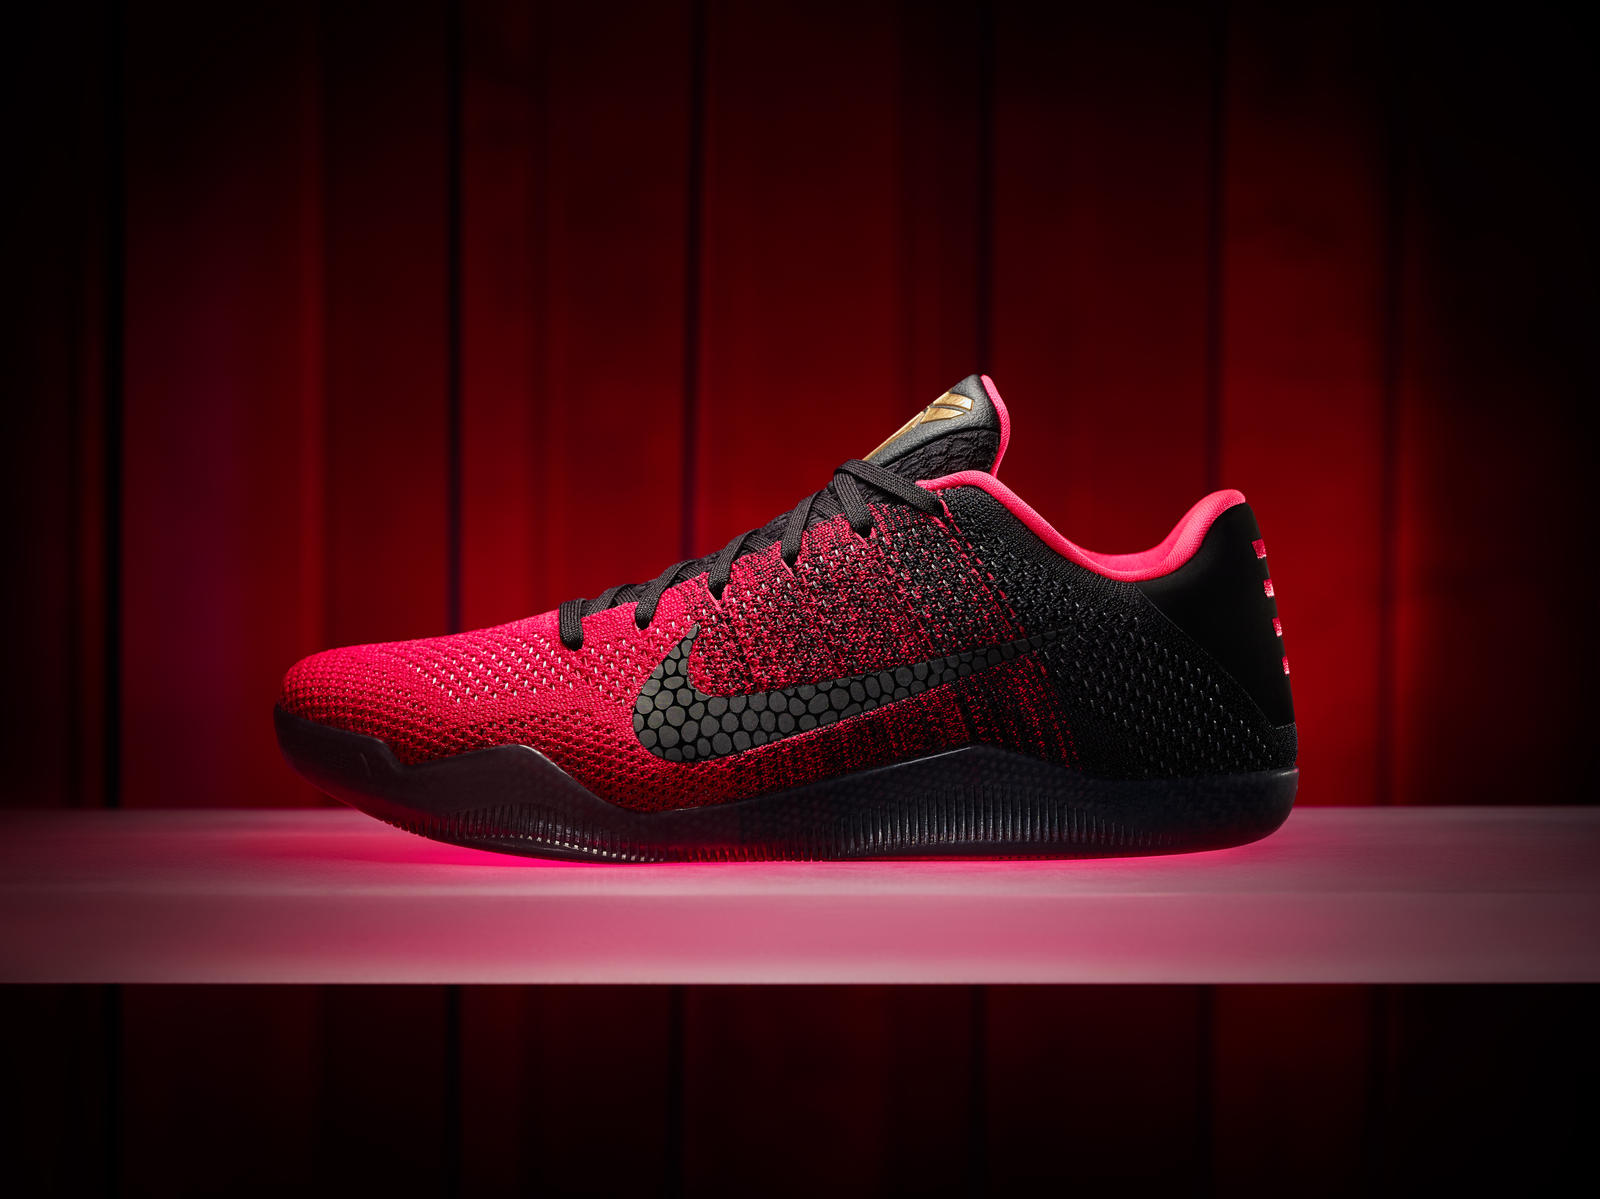 Nike Officially Unveils the Kobe 11 